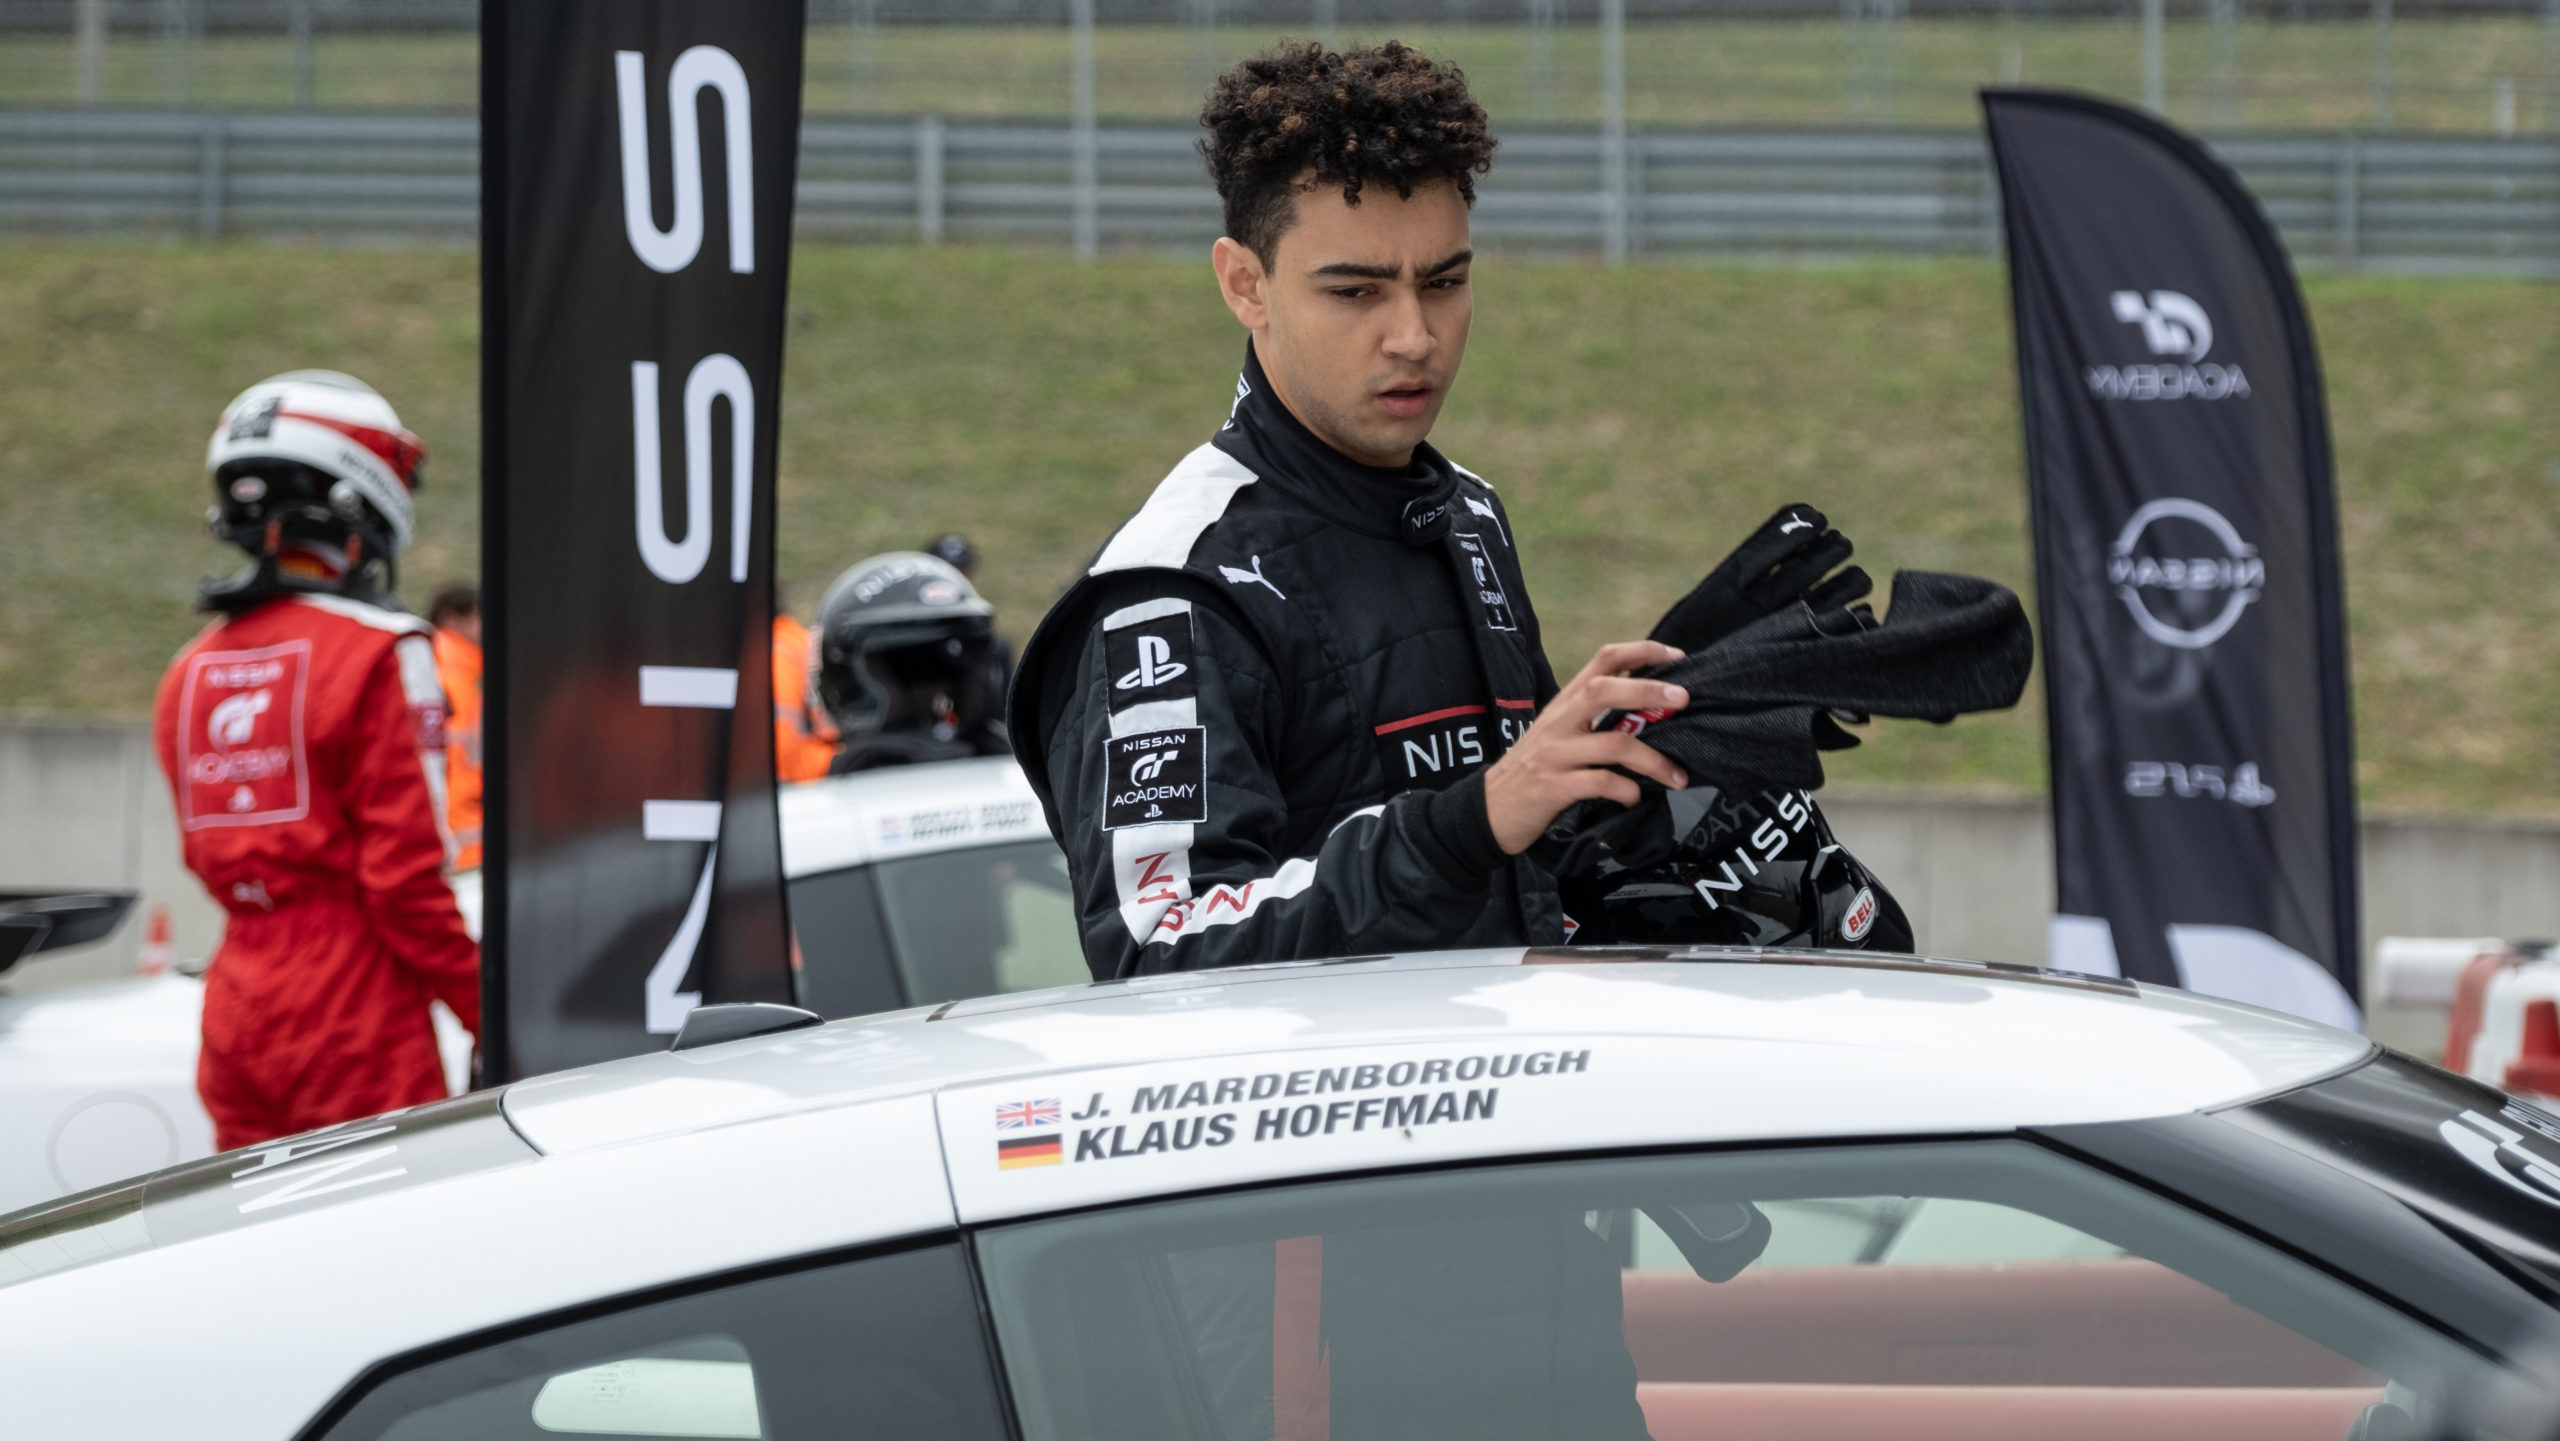 archie madekwe, darren cox, gran turismo, gt academy, jann mardenborough, orlando bloom, video games, gran turismo movie review: there's heart in this gamer-to-racer film